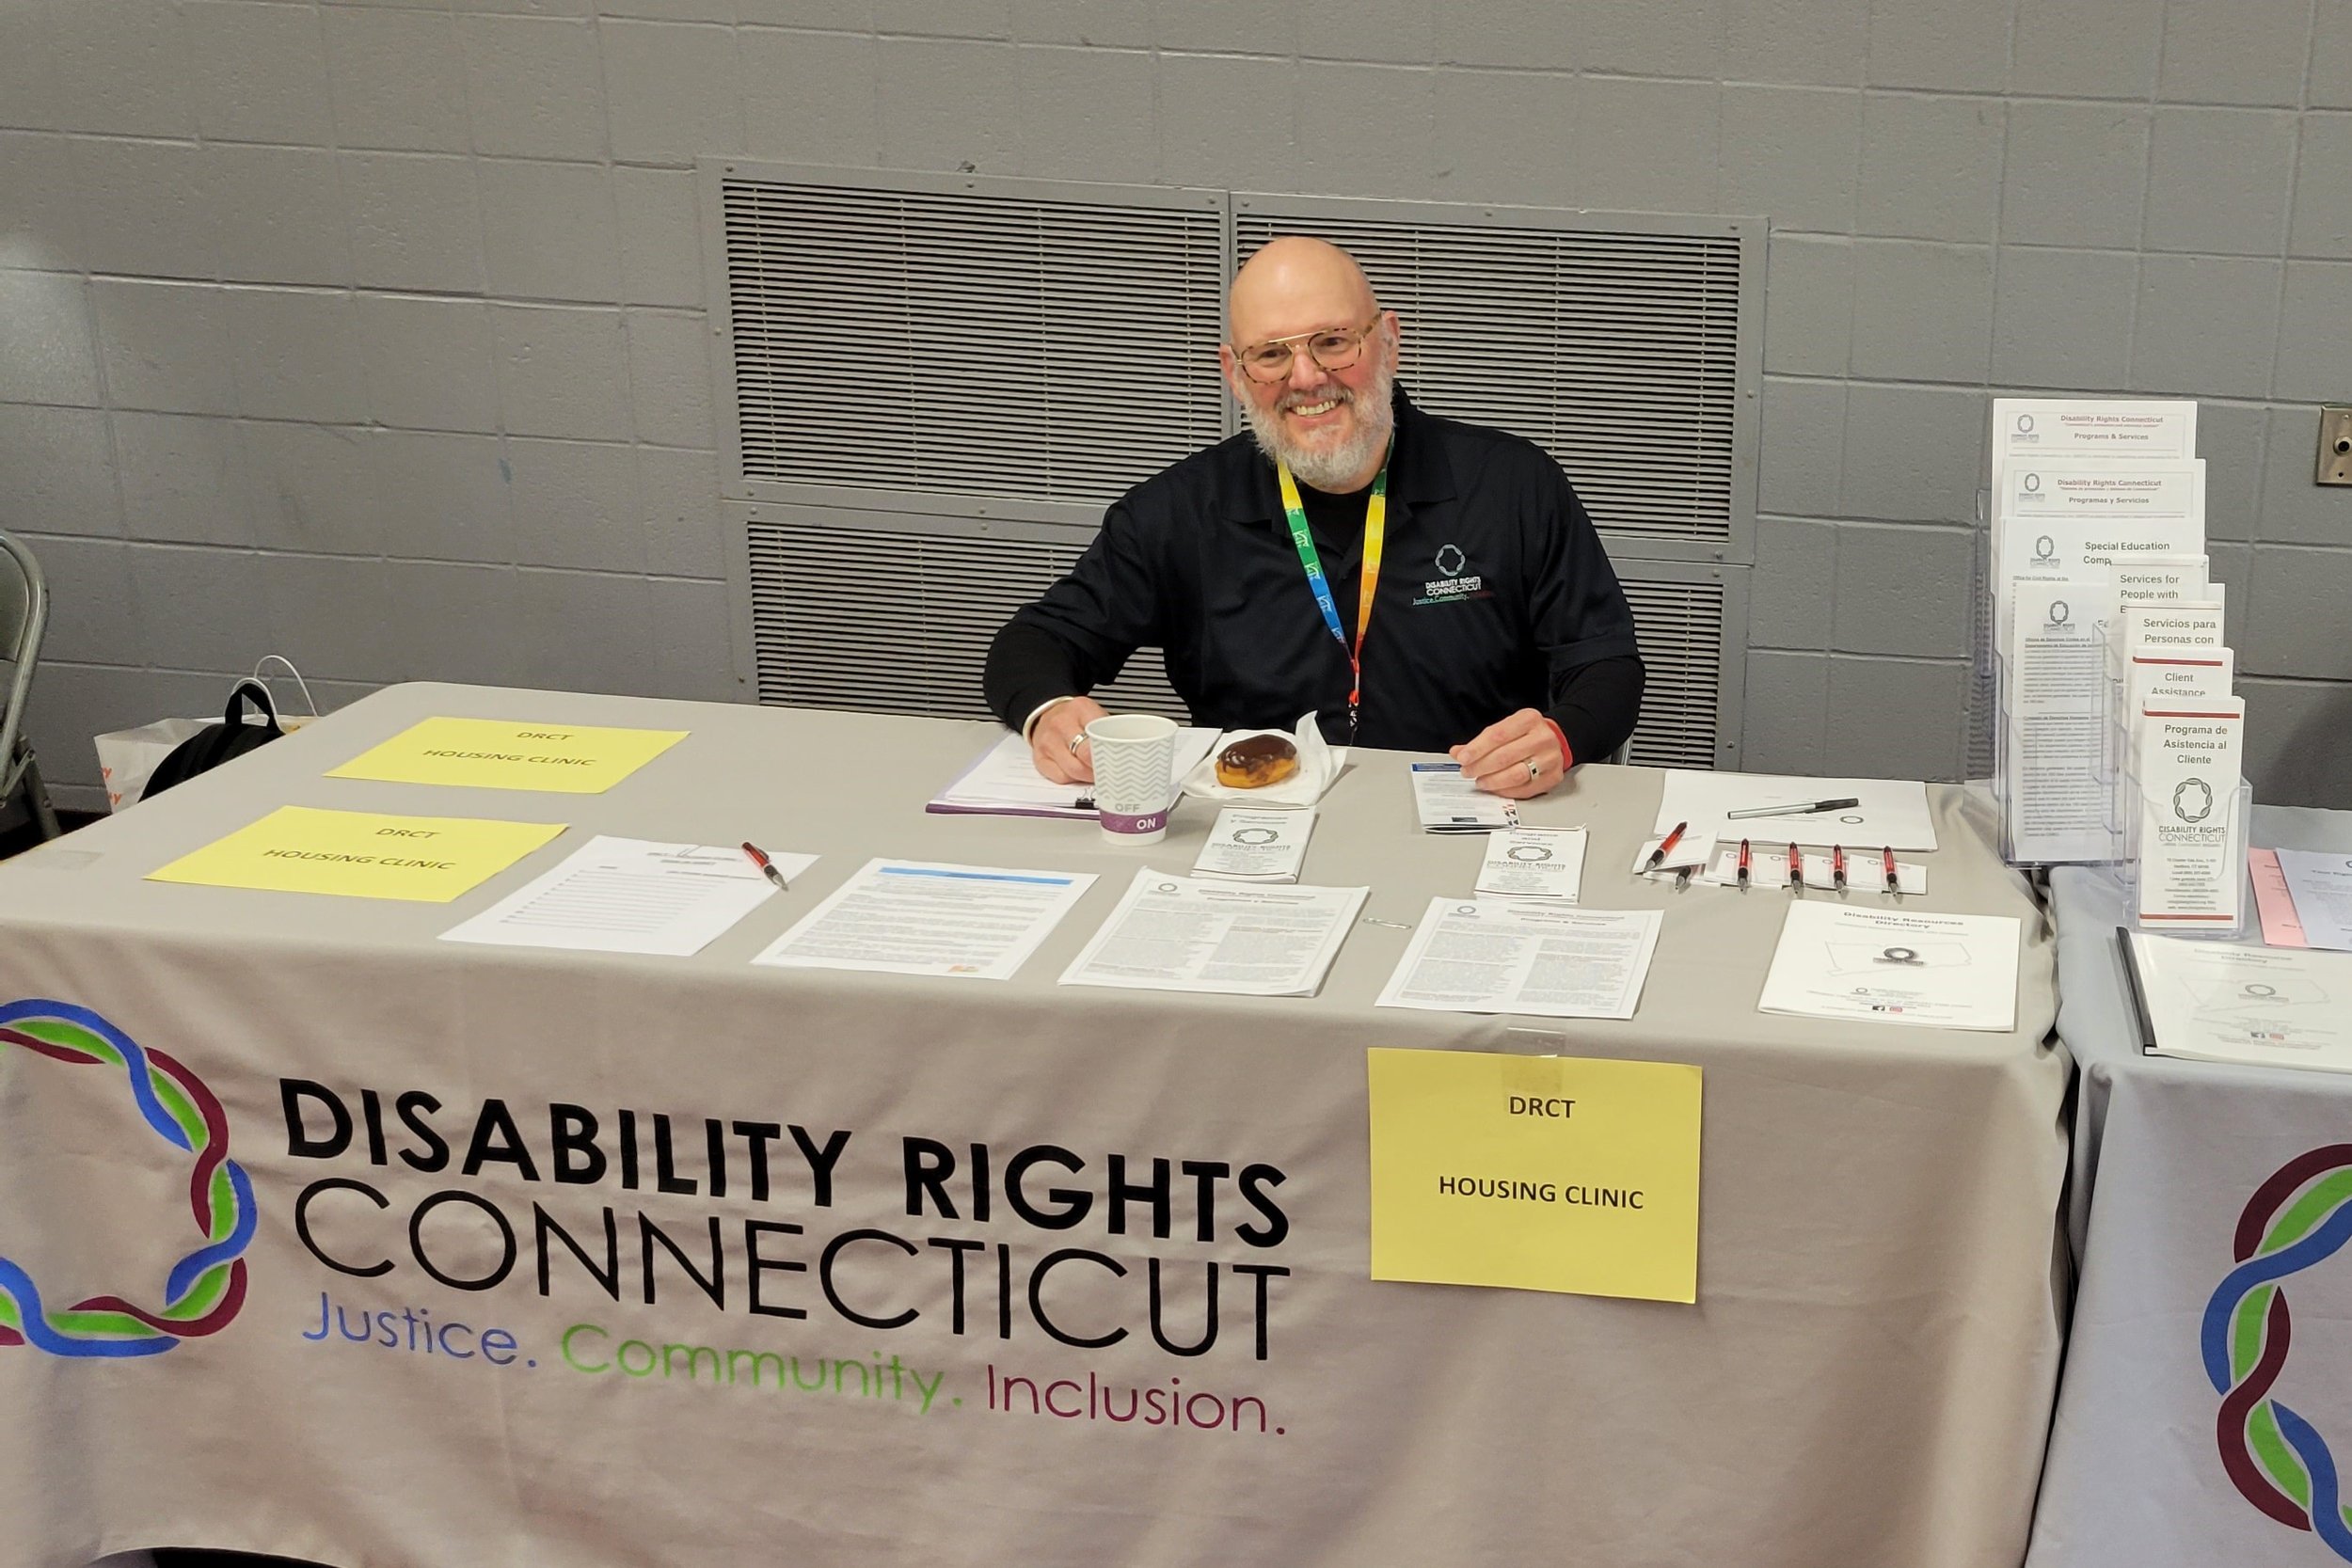   DRCT’s Staff Attorney, Steve Byers sitting down smiling behind DRCT housing clinic table.  